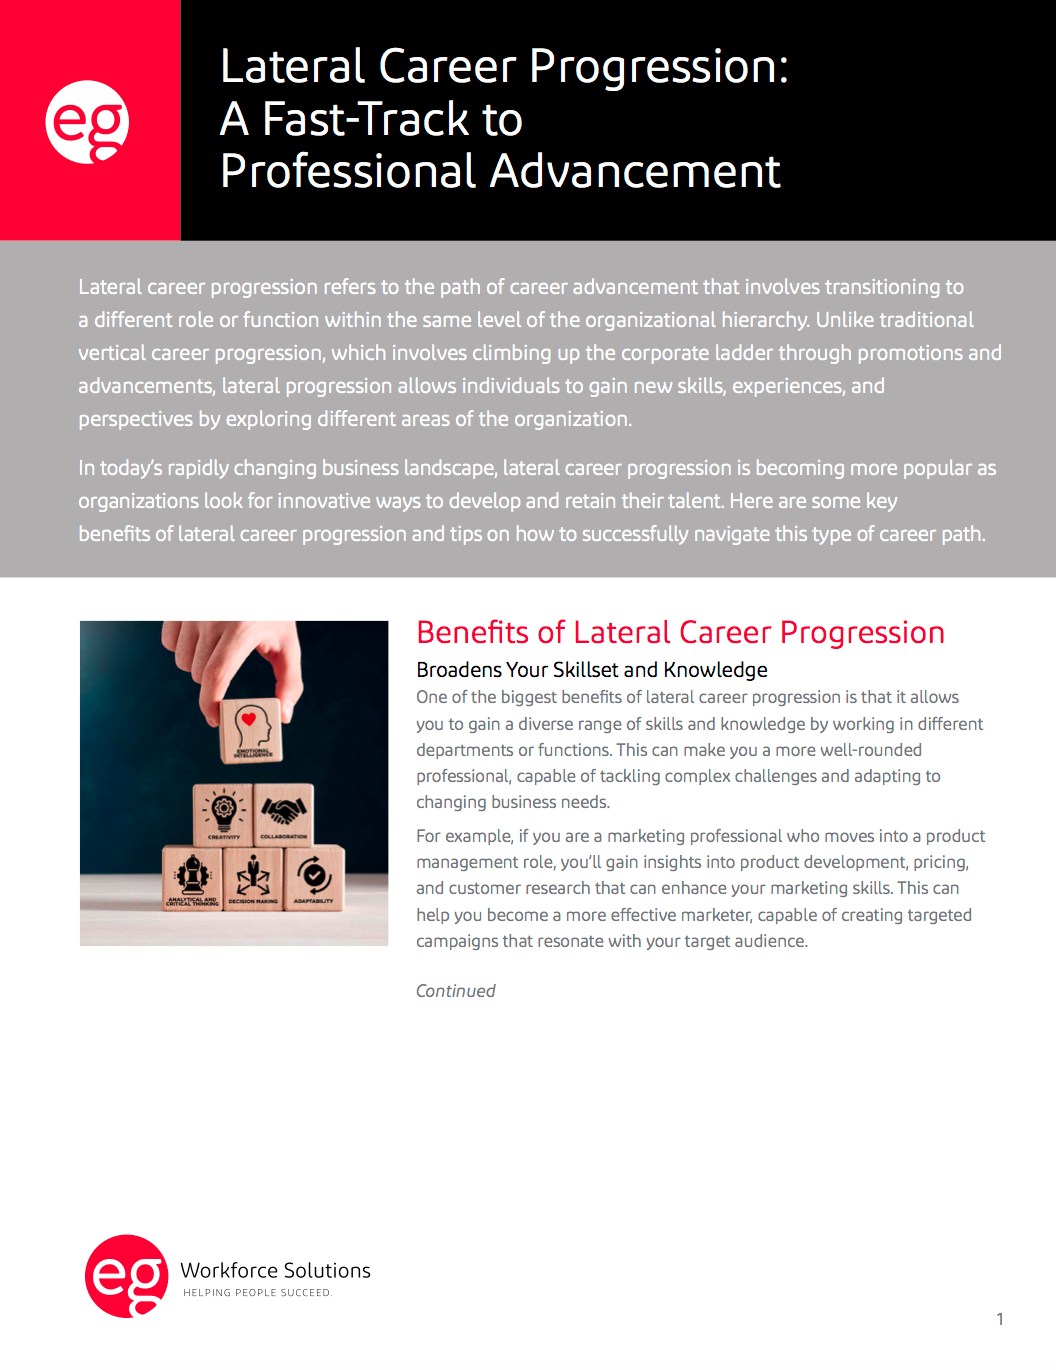 Lateral Career Progression: A Fast-Track to Career Advancement